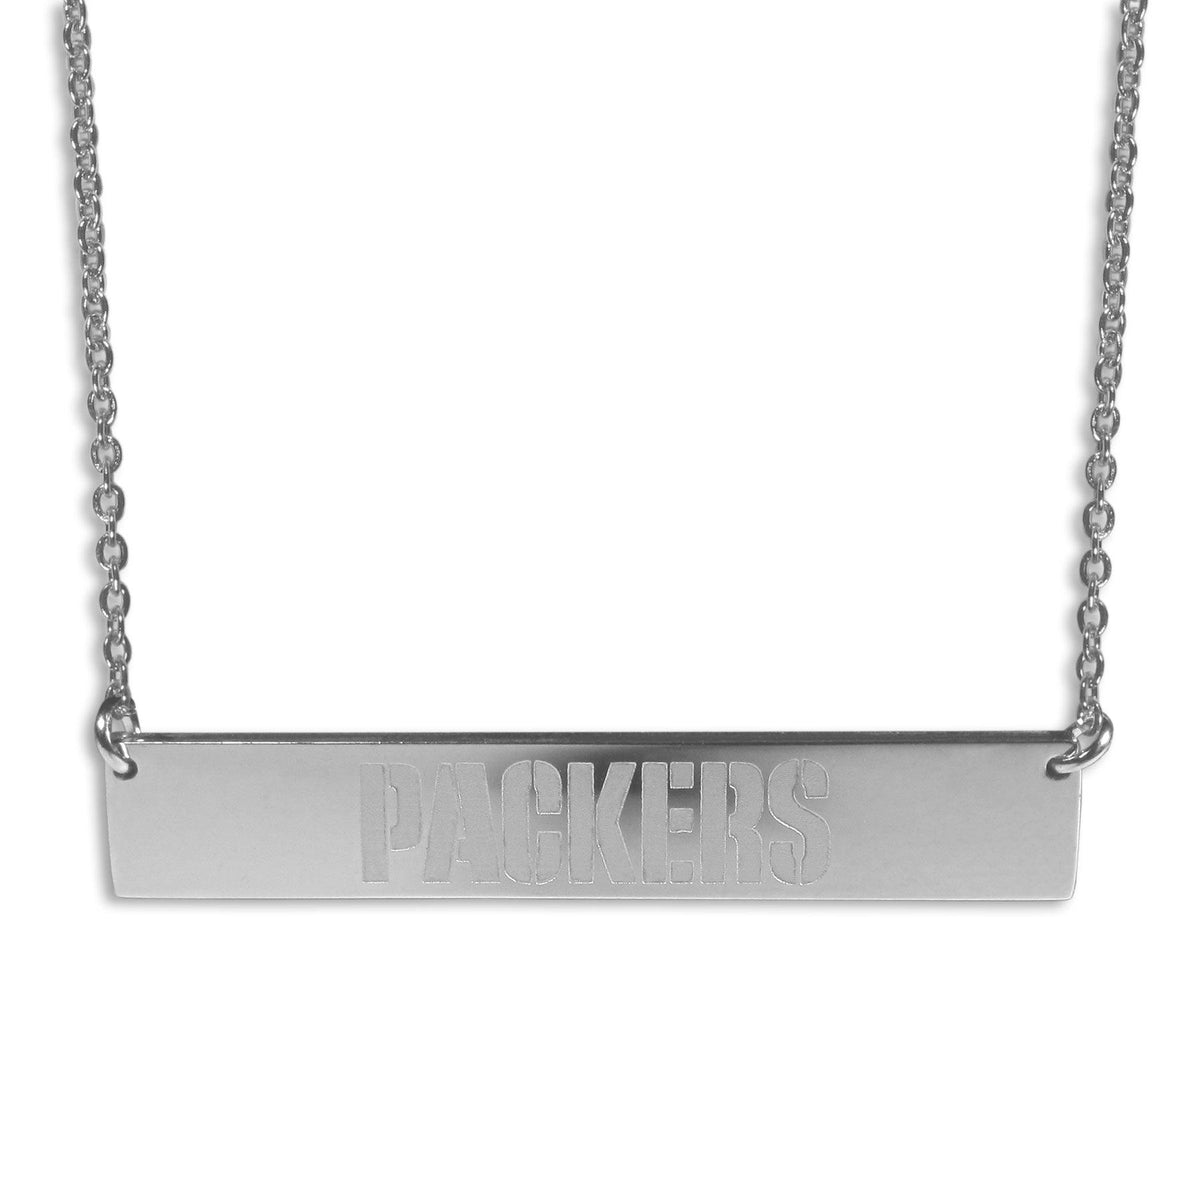 Green Bay Packers Bar Necklace - Flyclothing LLC